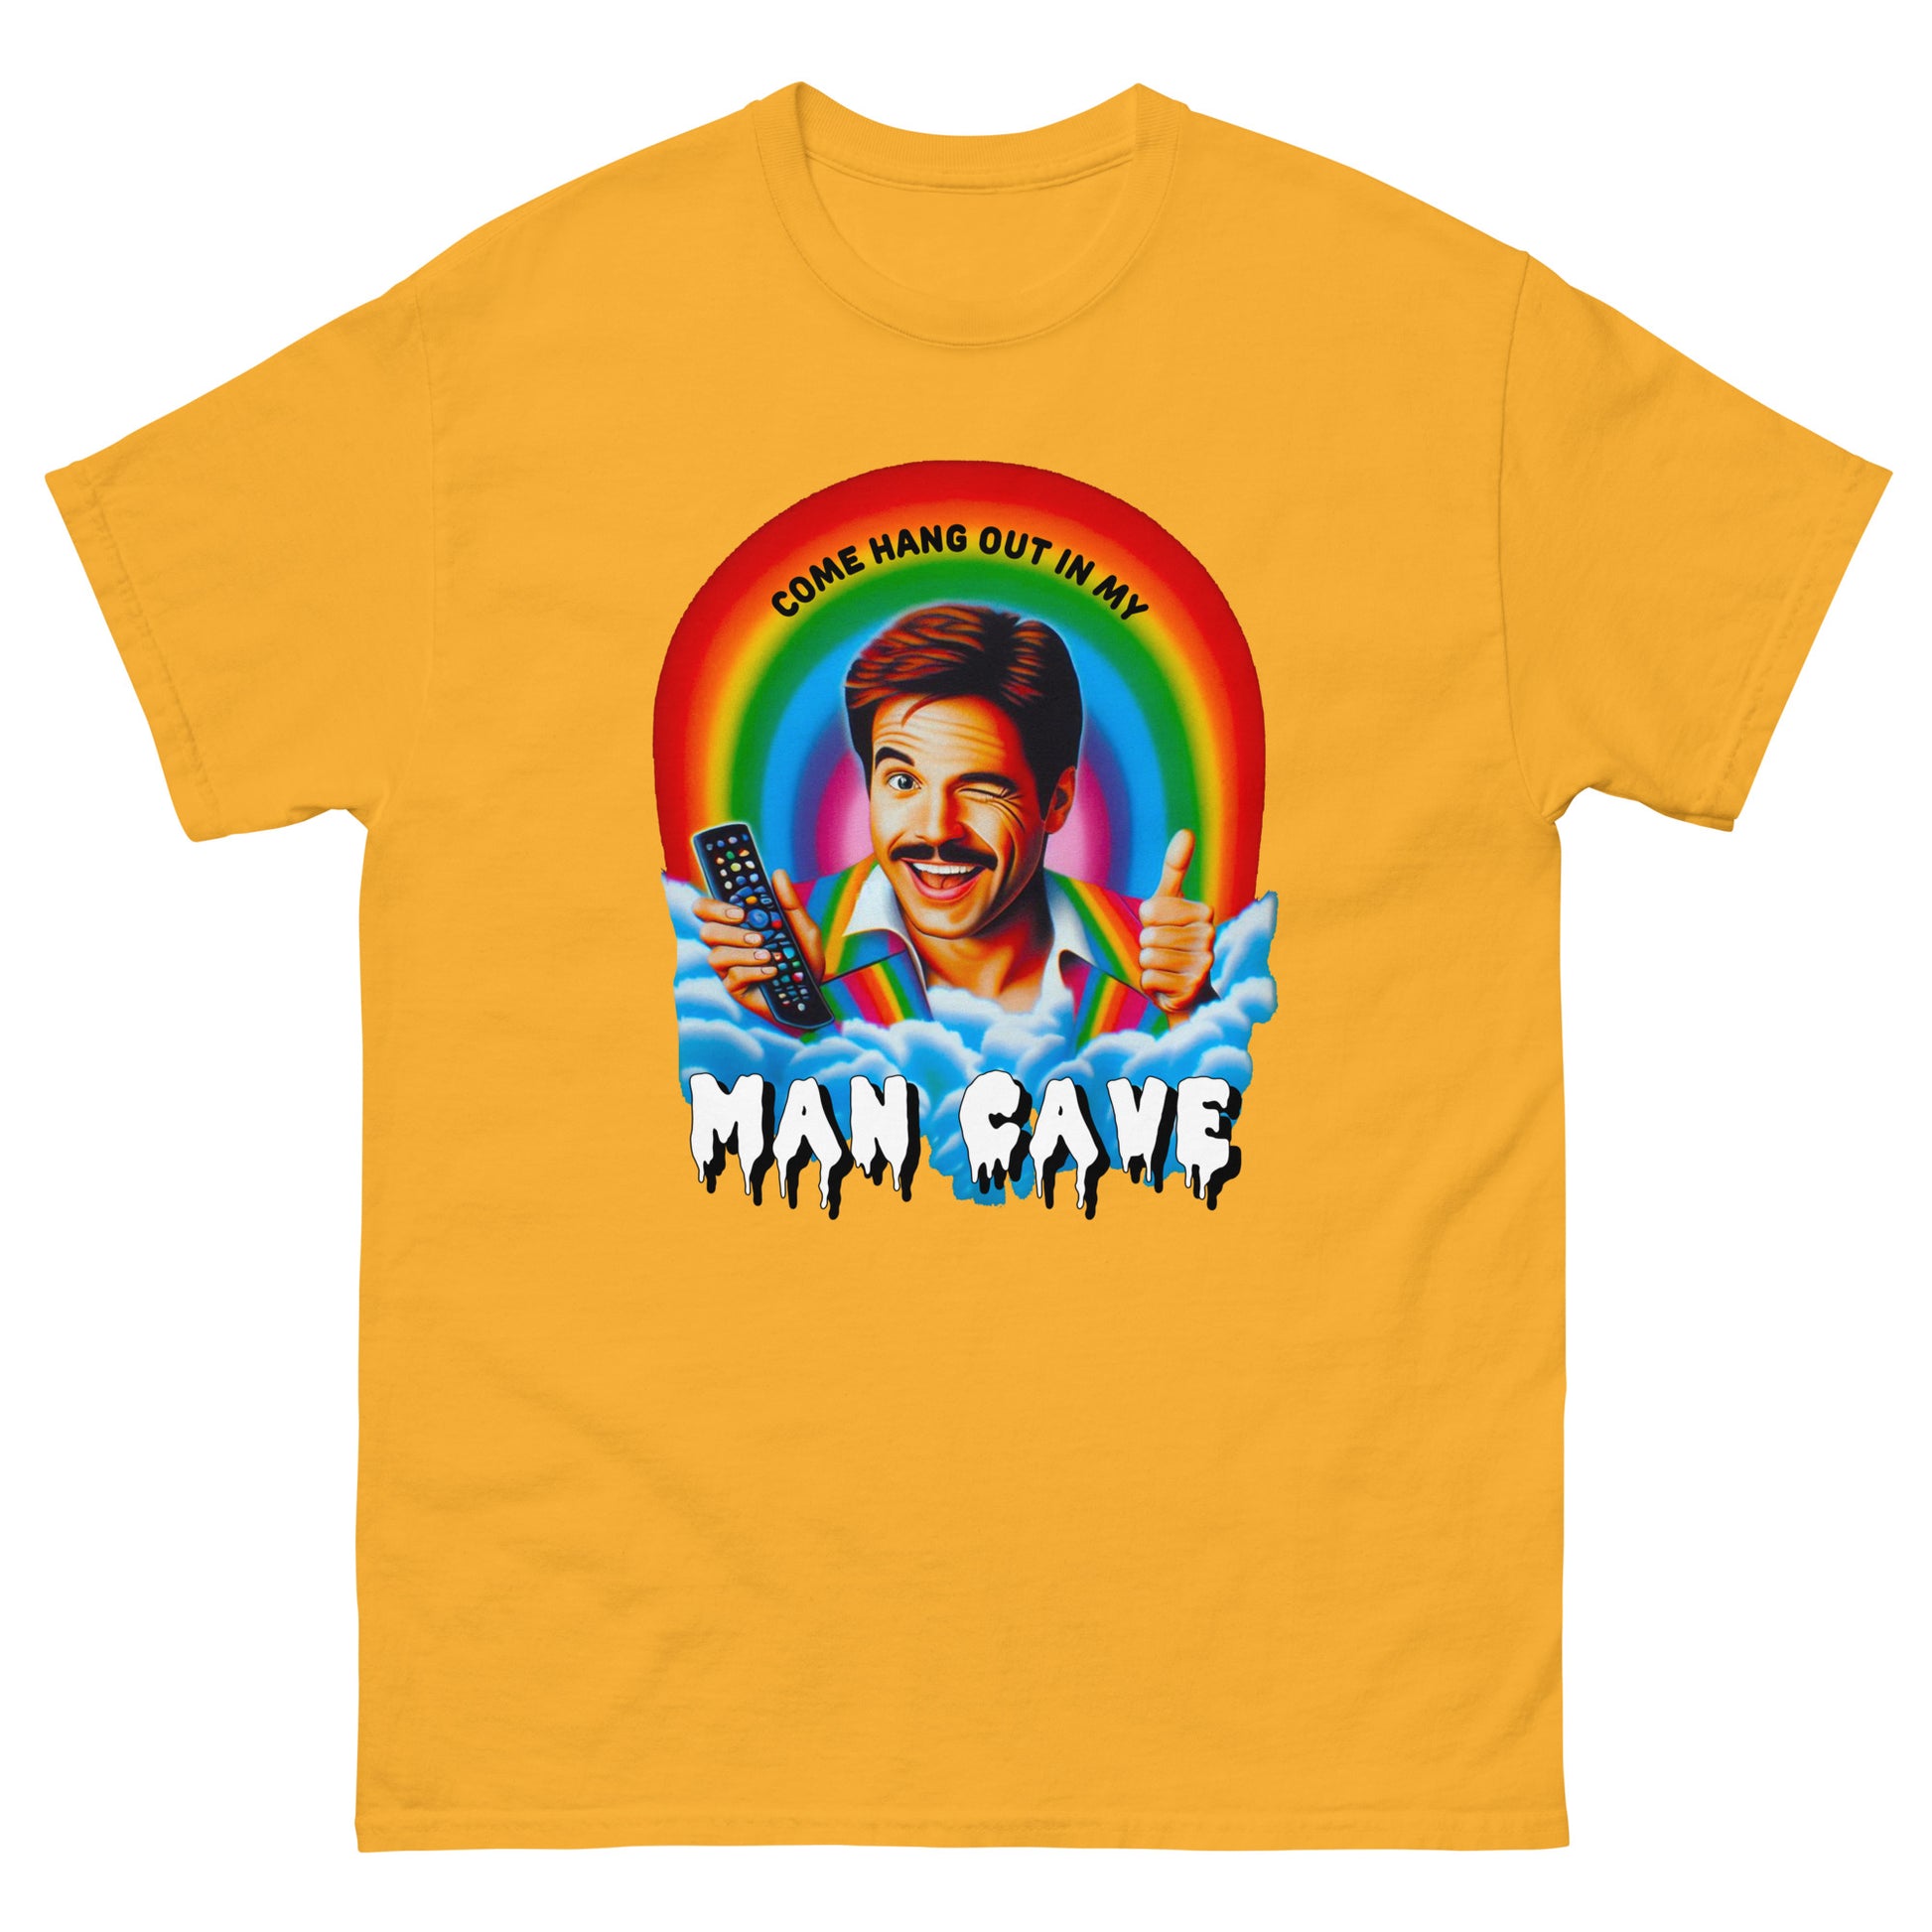 Come hang out in my man cave design printed on t-shirt by Whistler Shirts